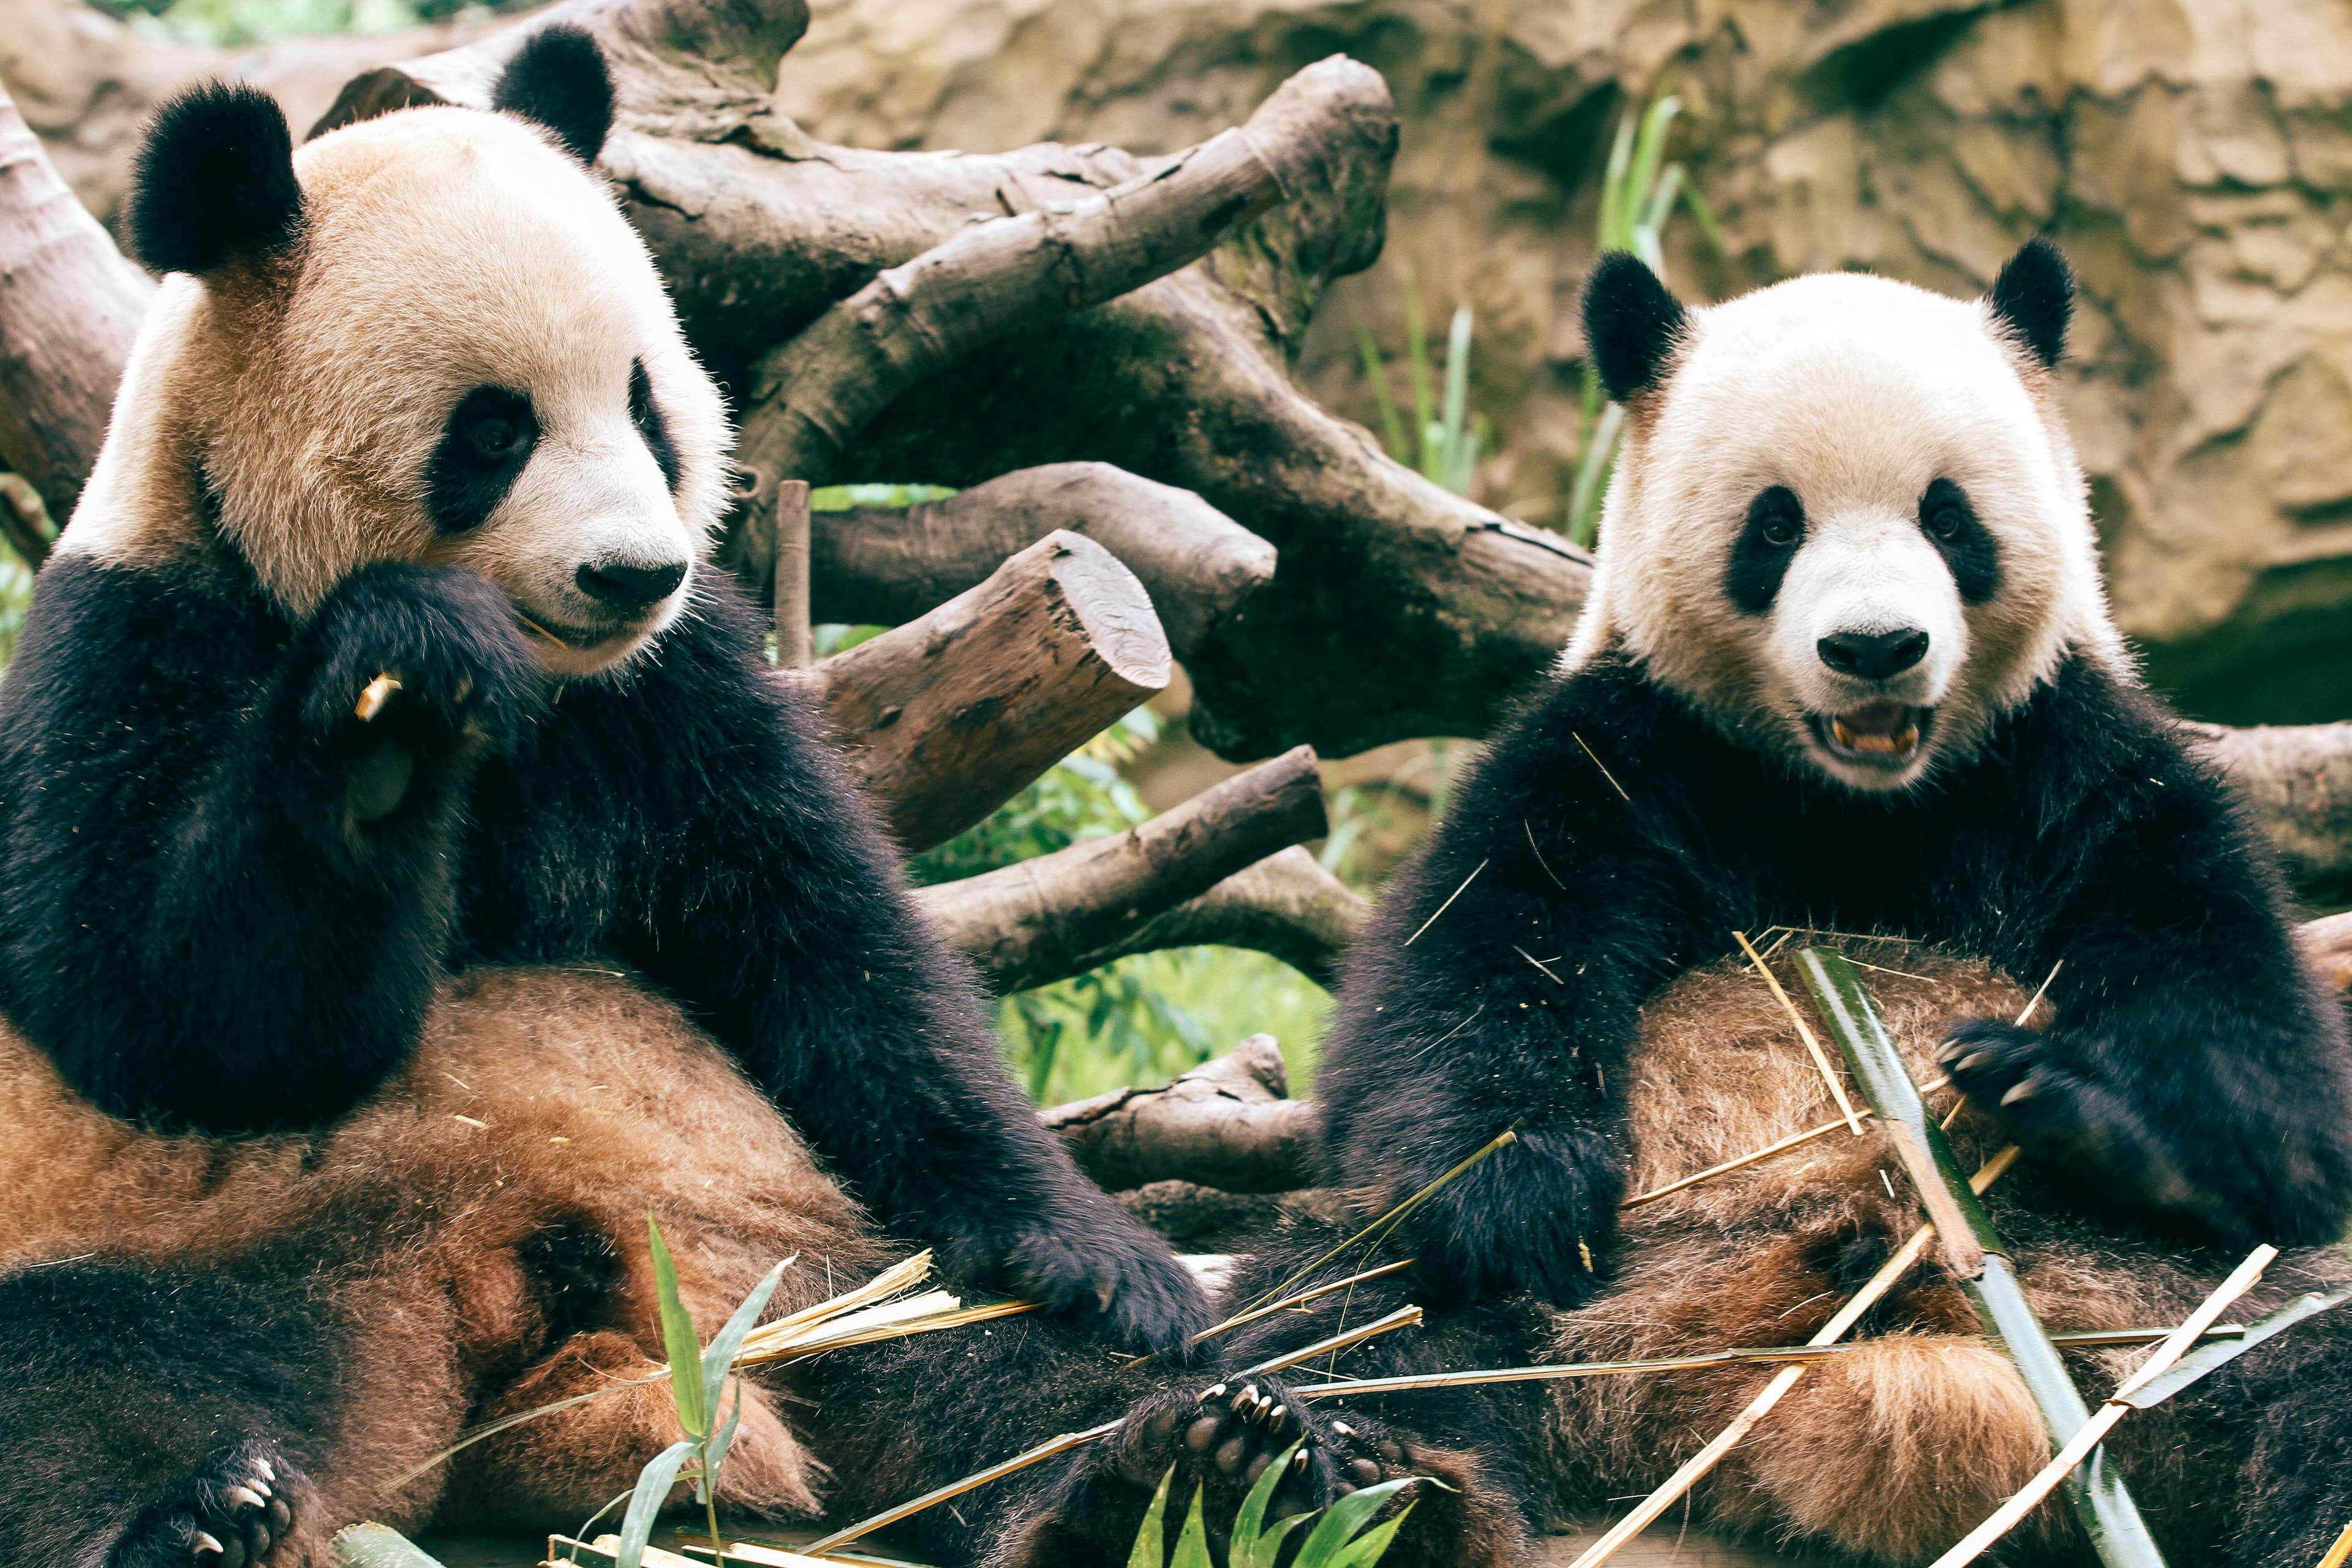 Two giant pandas sit next to each other and eat bamboo.